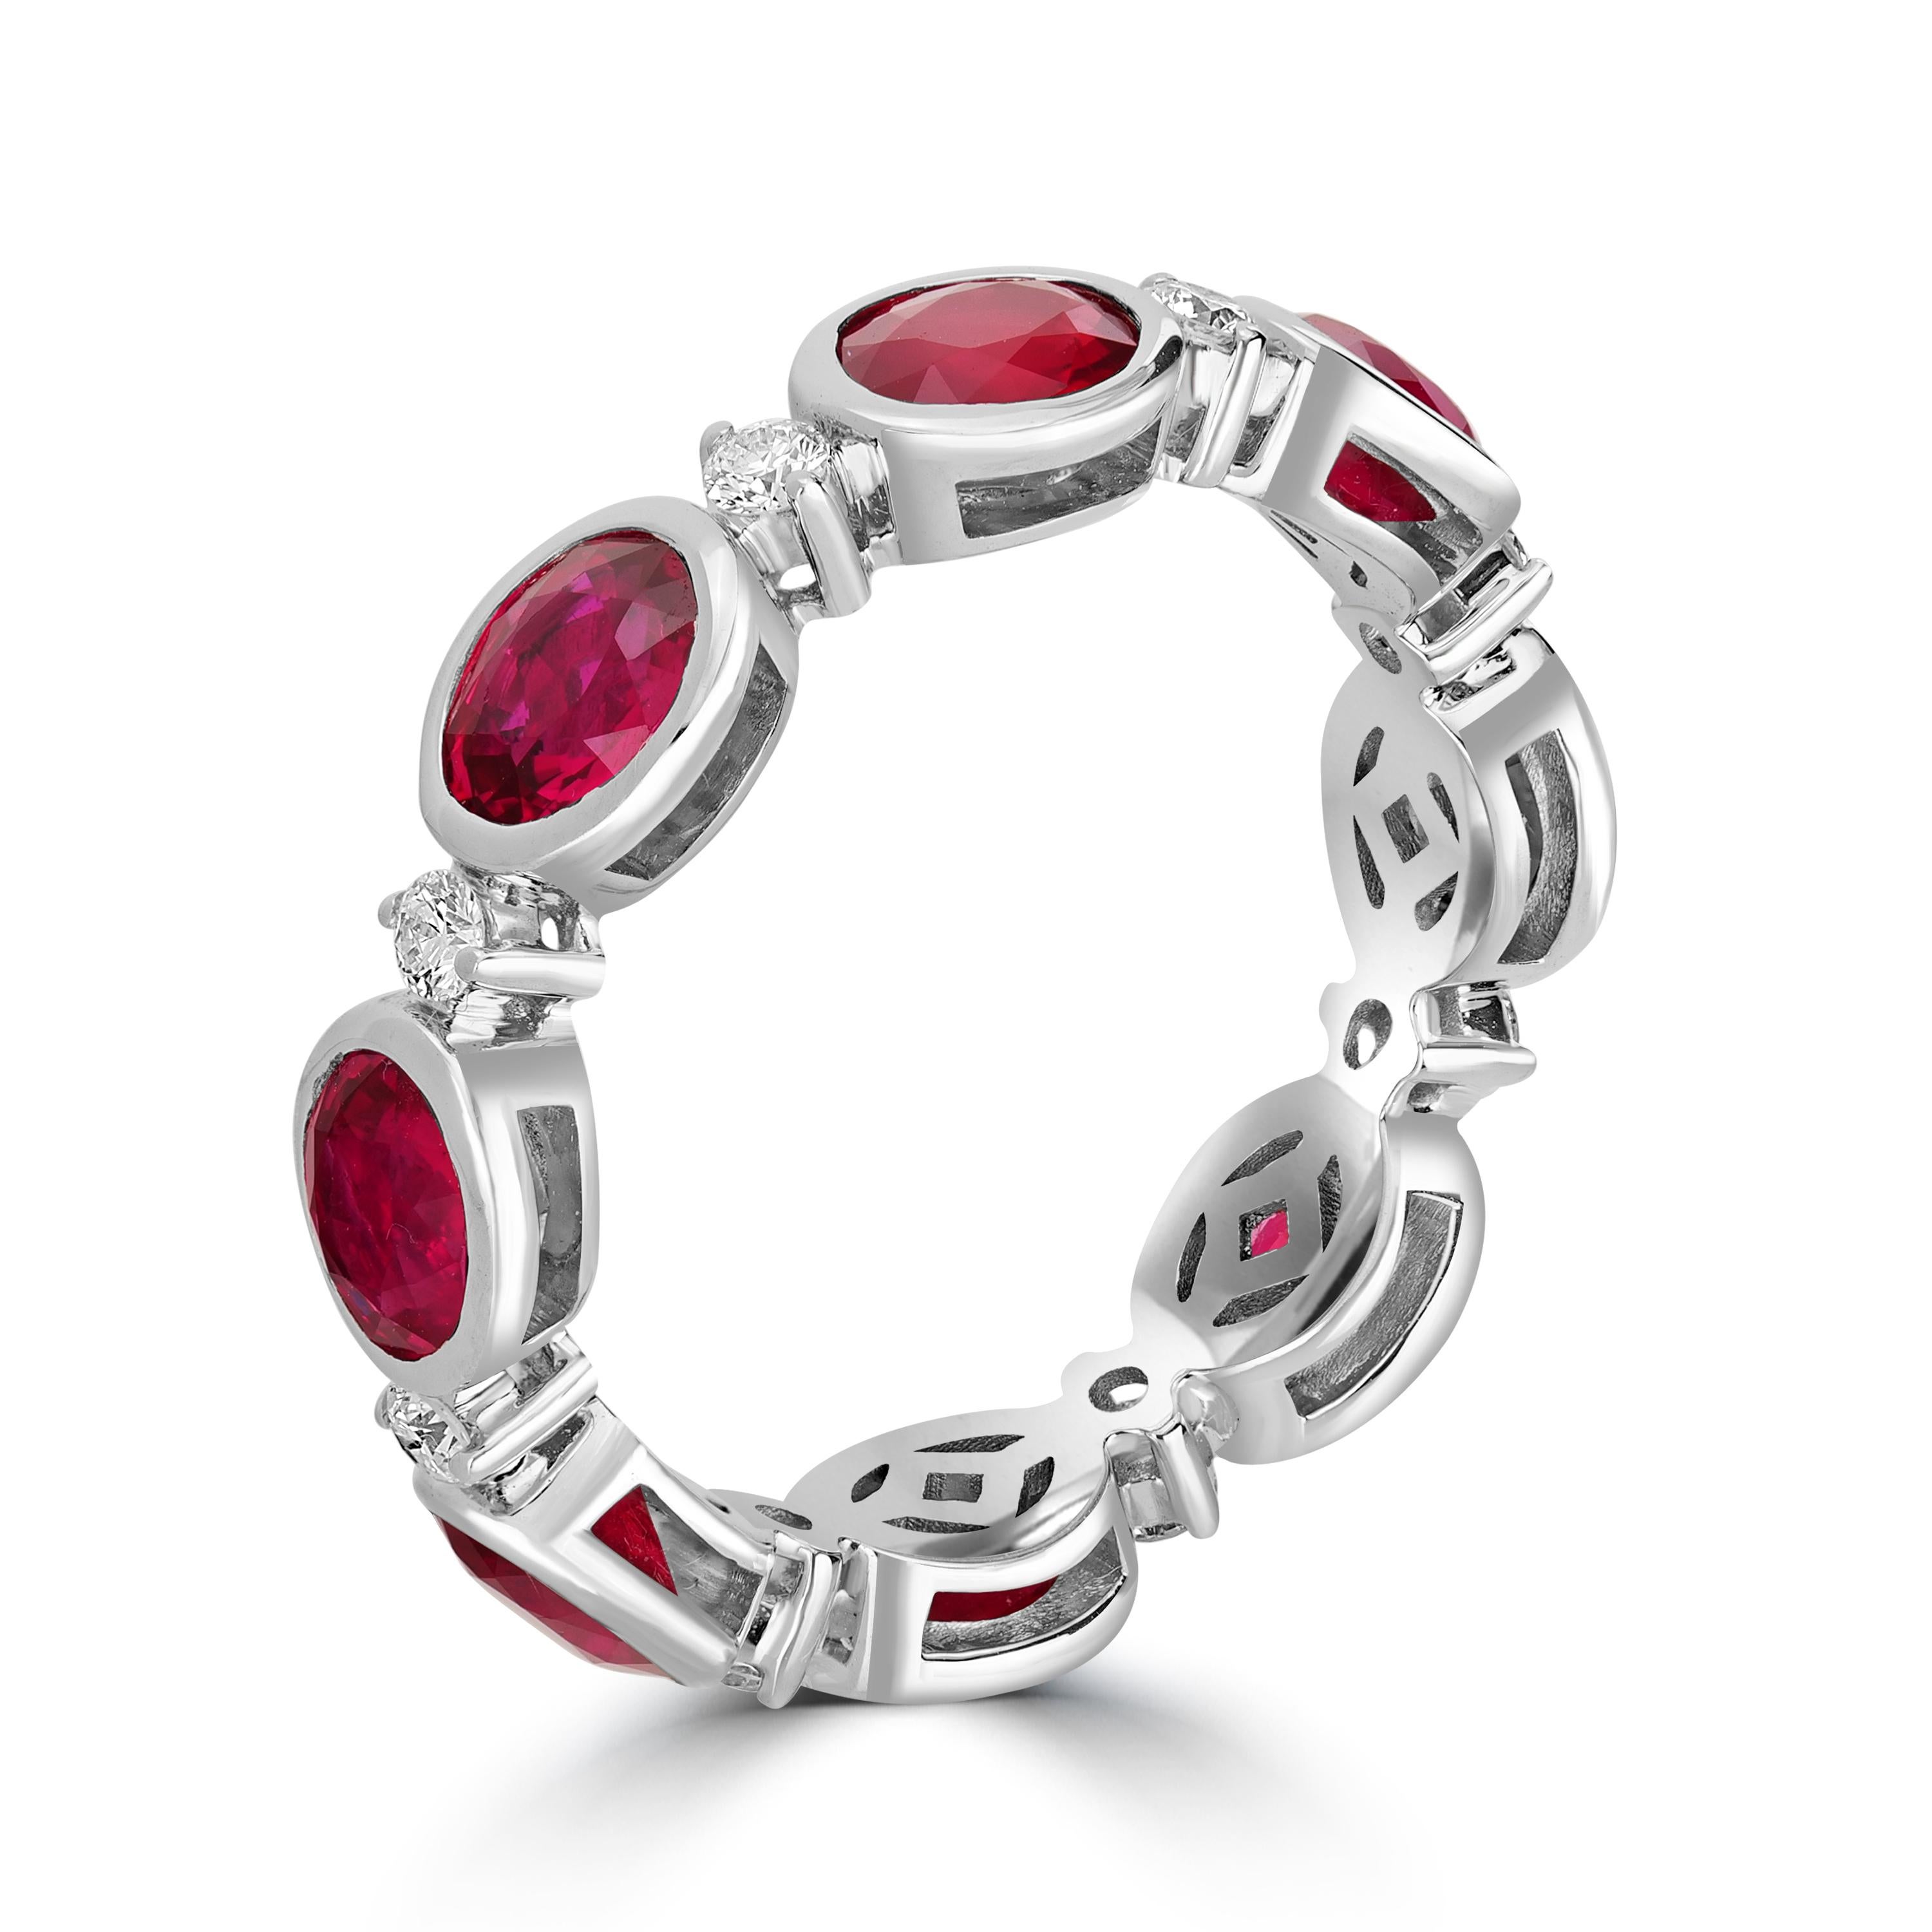 This spectacular ruby and diamond eternity band ring is the one for your jewelry collection. Set in bezel setting, this ring has rubies from Mozambique known for its exquisite pinkish red hue, The diamonds used are of G-H color and SI clarity. The